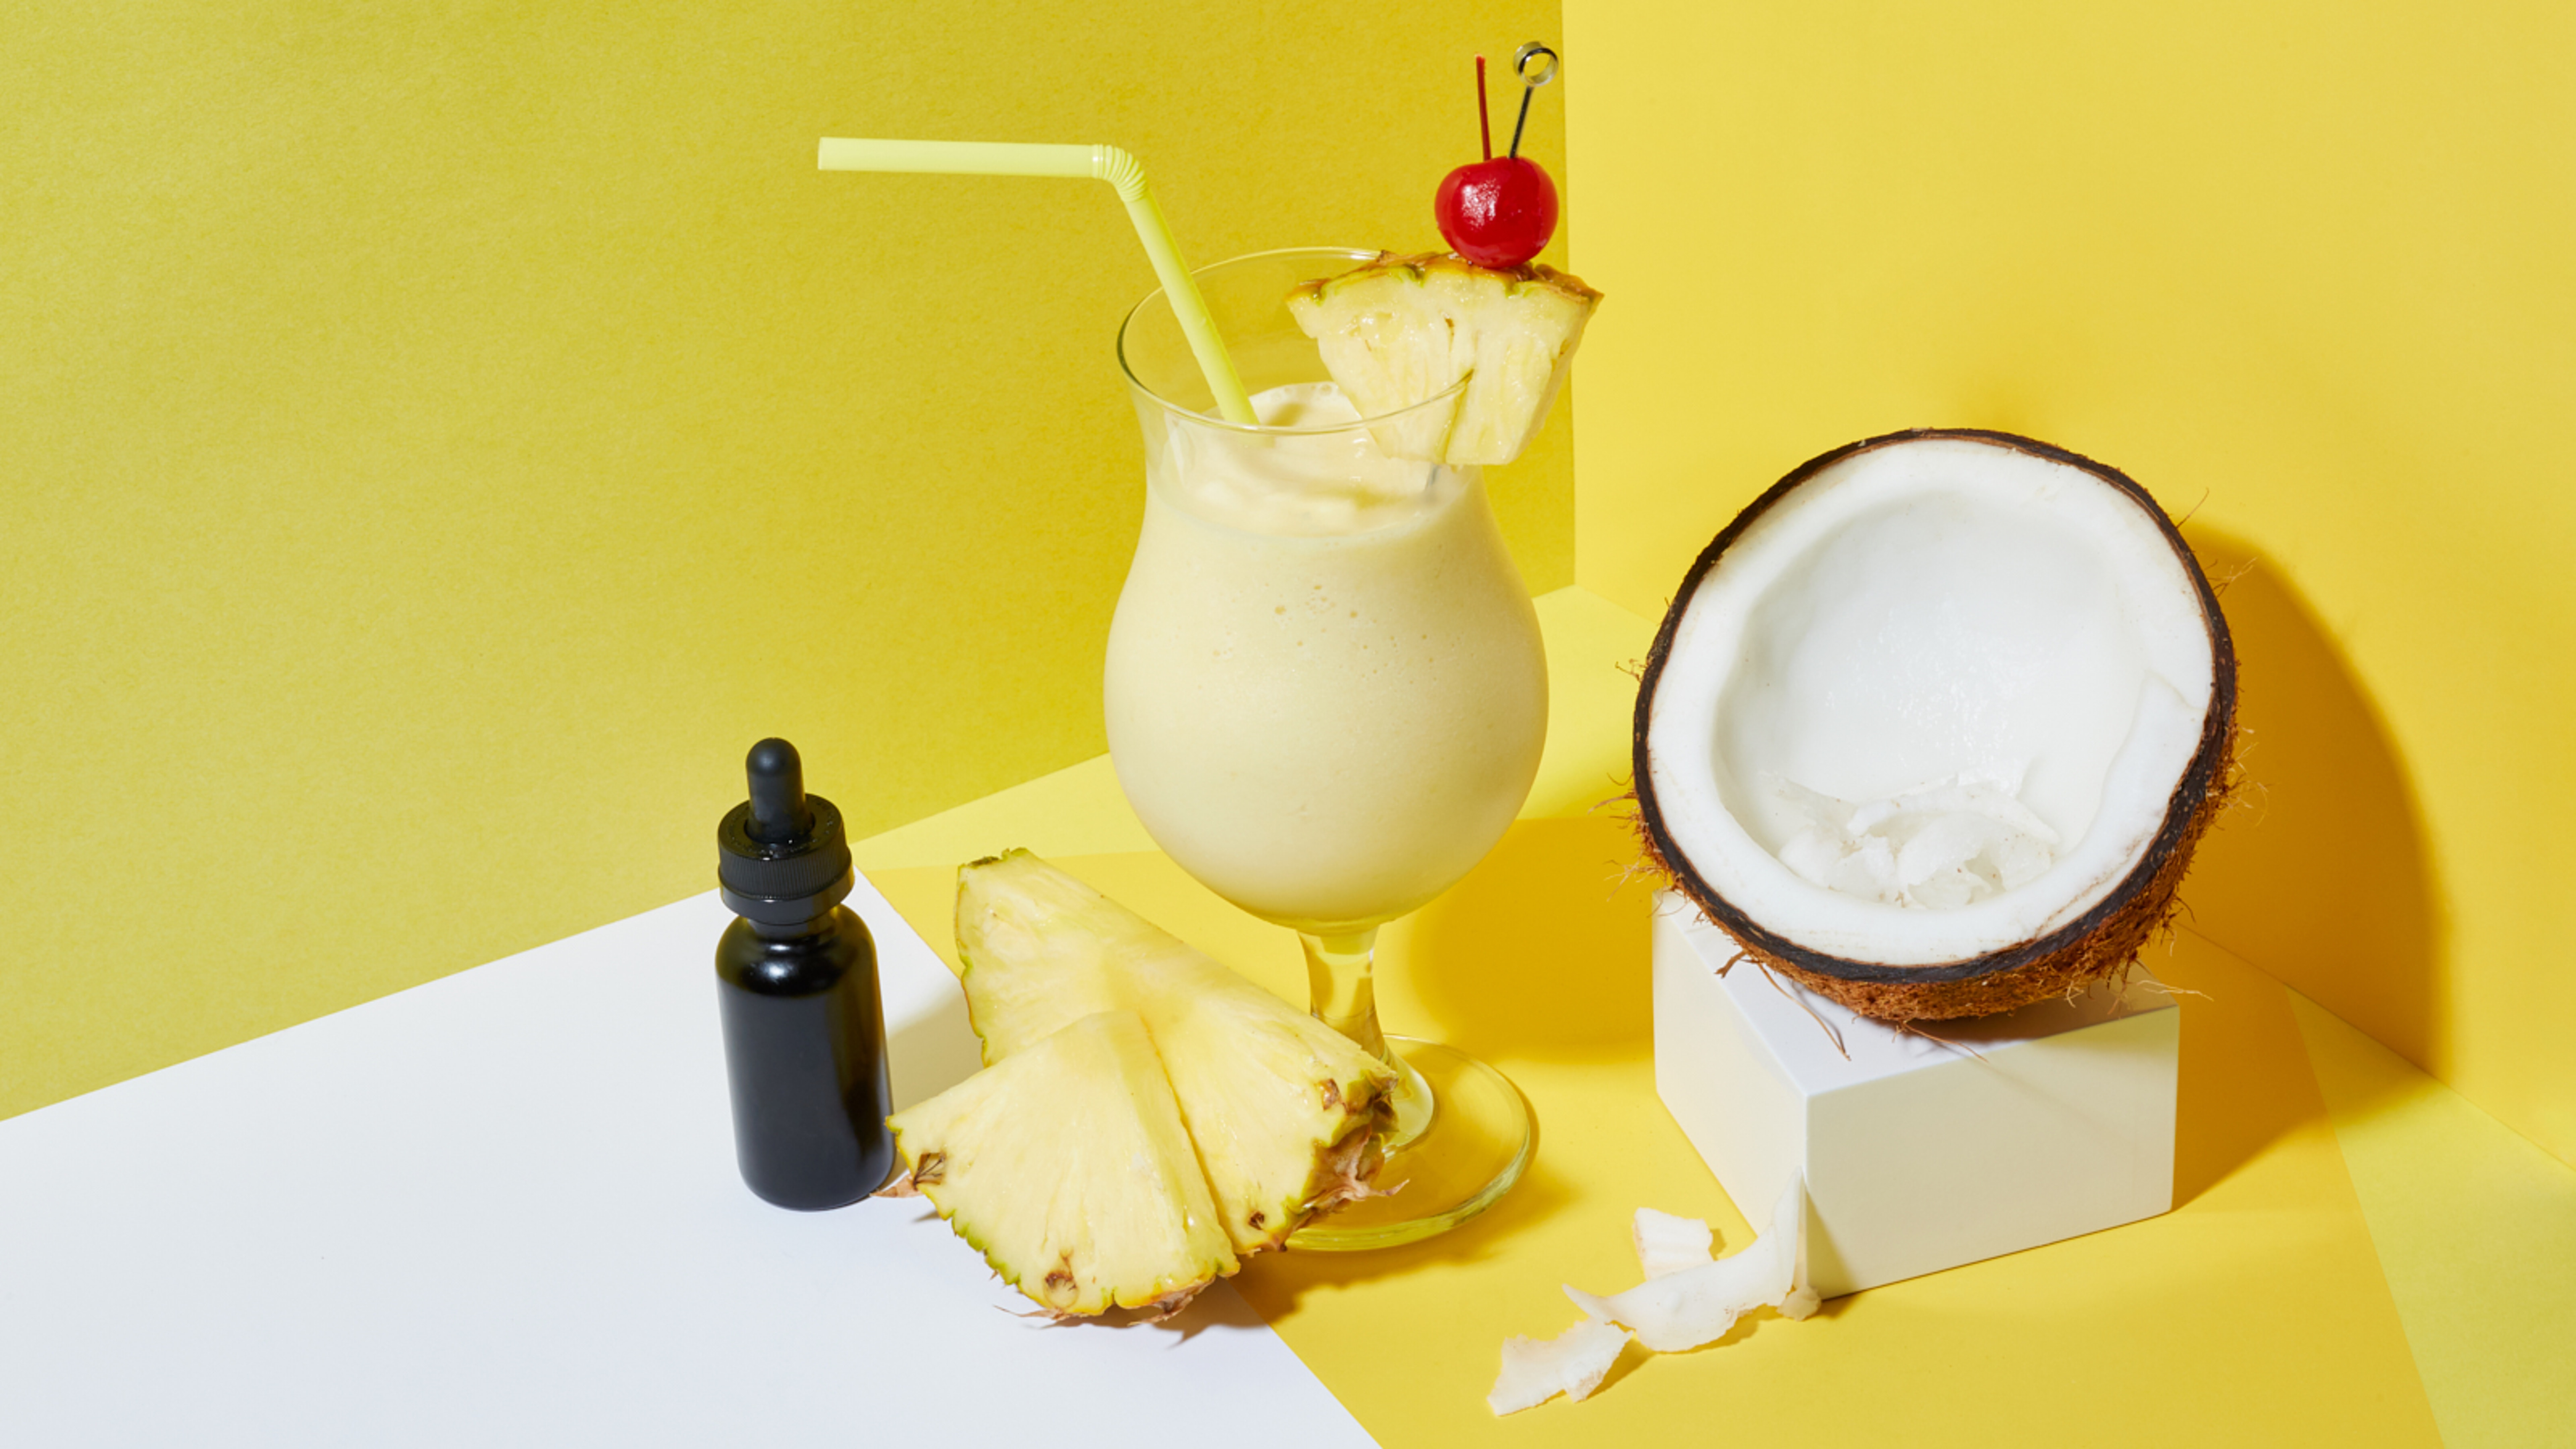 Summer Weed Cocktails: How To Make Cannabis-Infused Piña Chillada